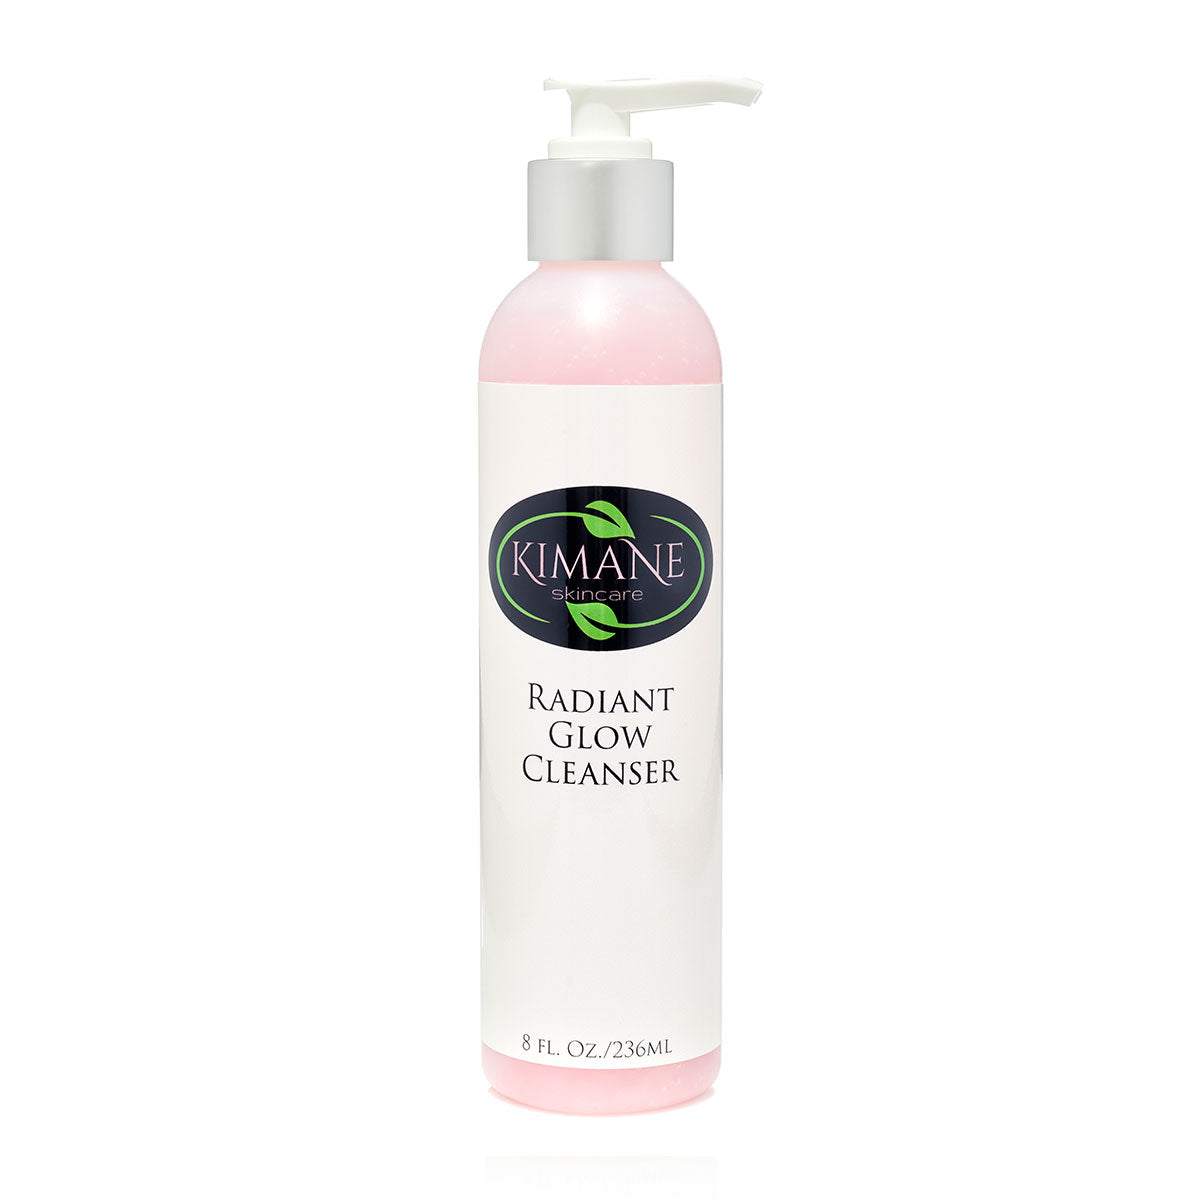 Radiant Glow Cleanser